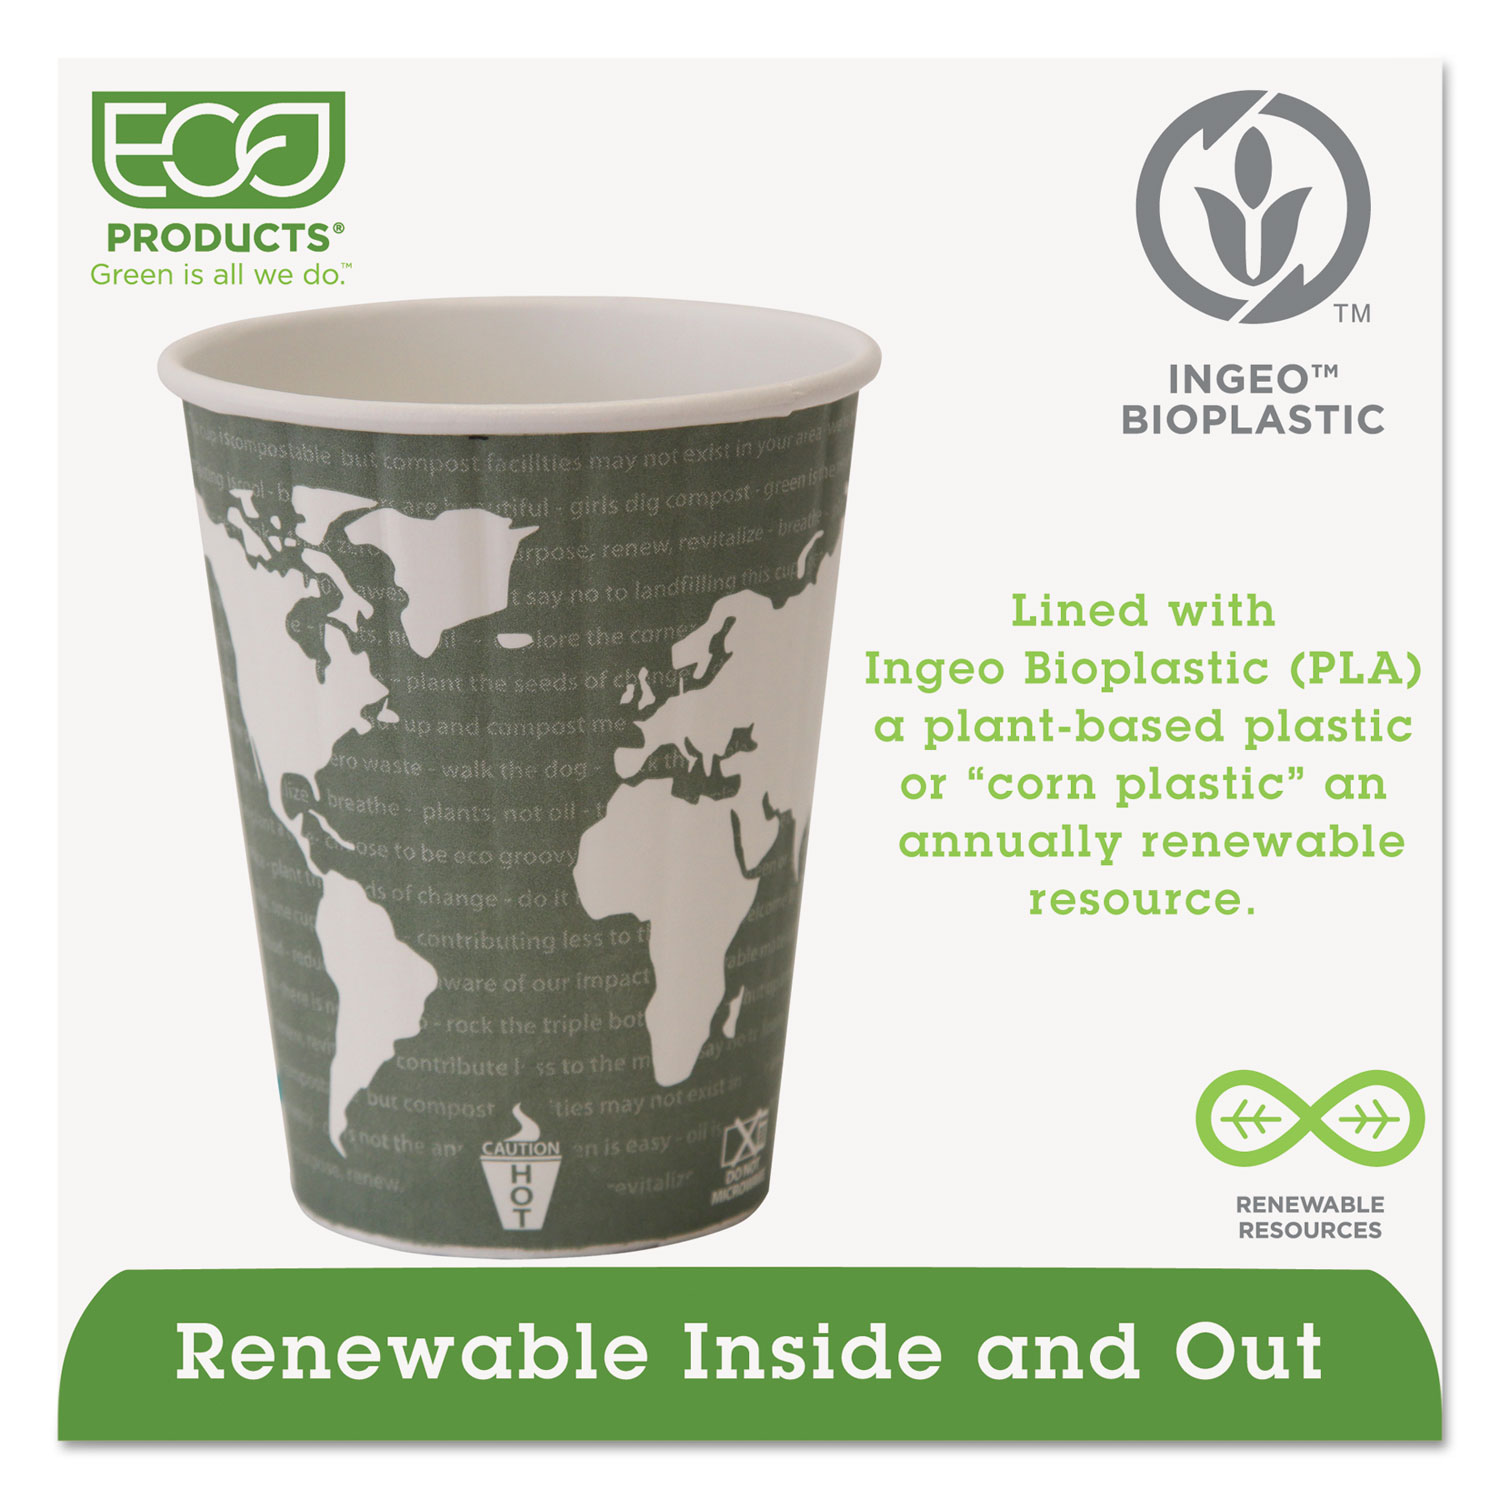 World Art Renewable & Compostable Insulated Hot Cups - 12oz., 40/PK, 15 PK/CT